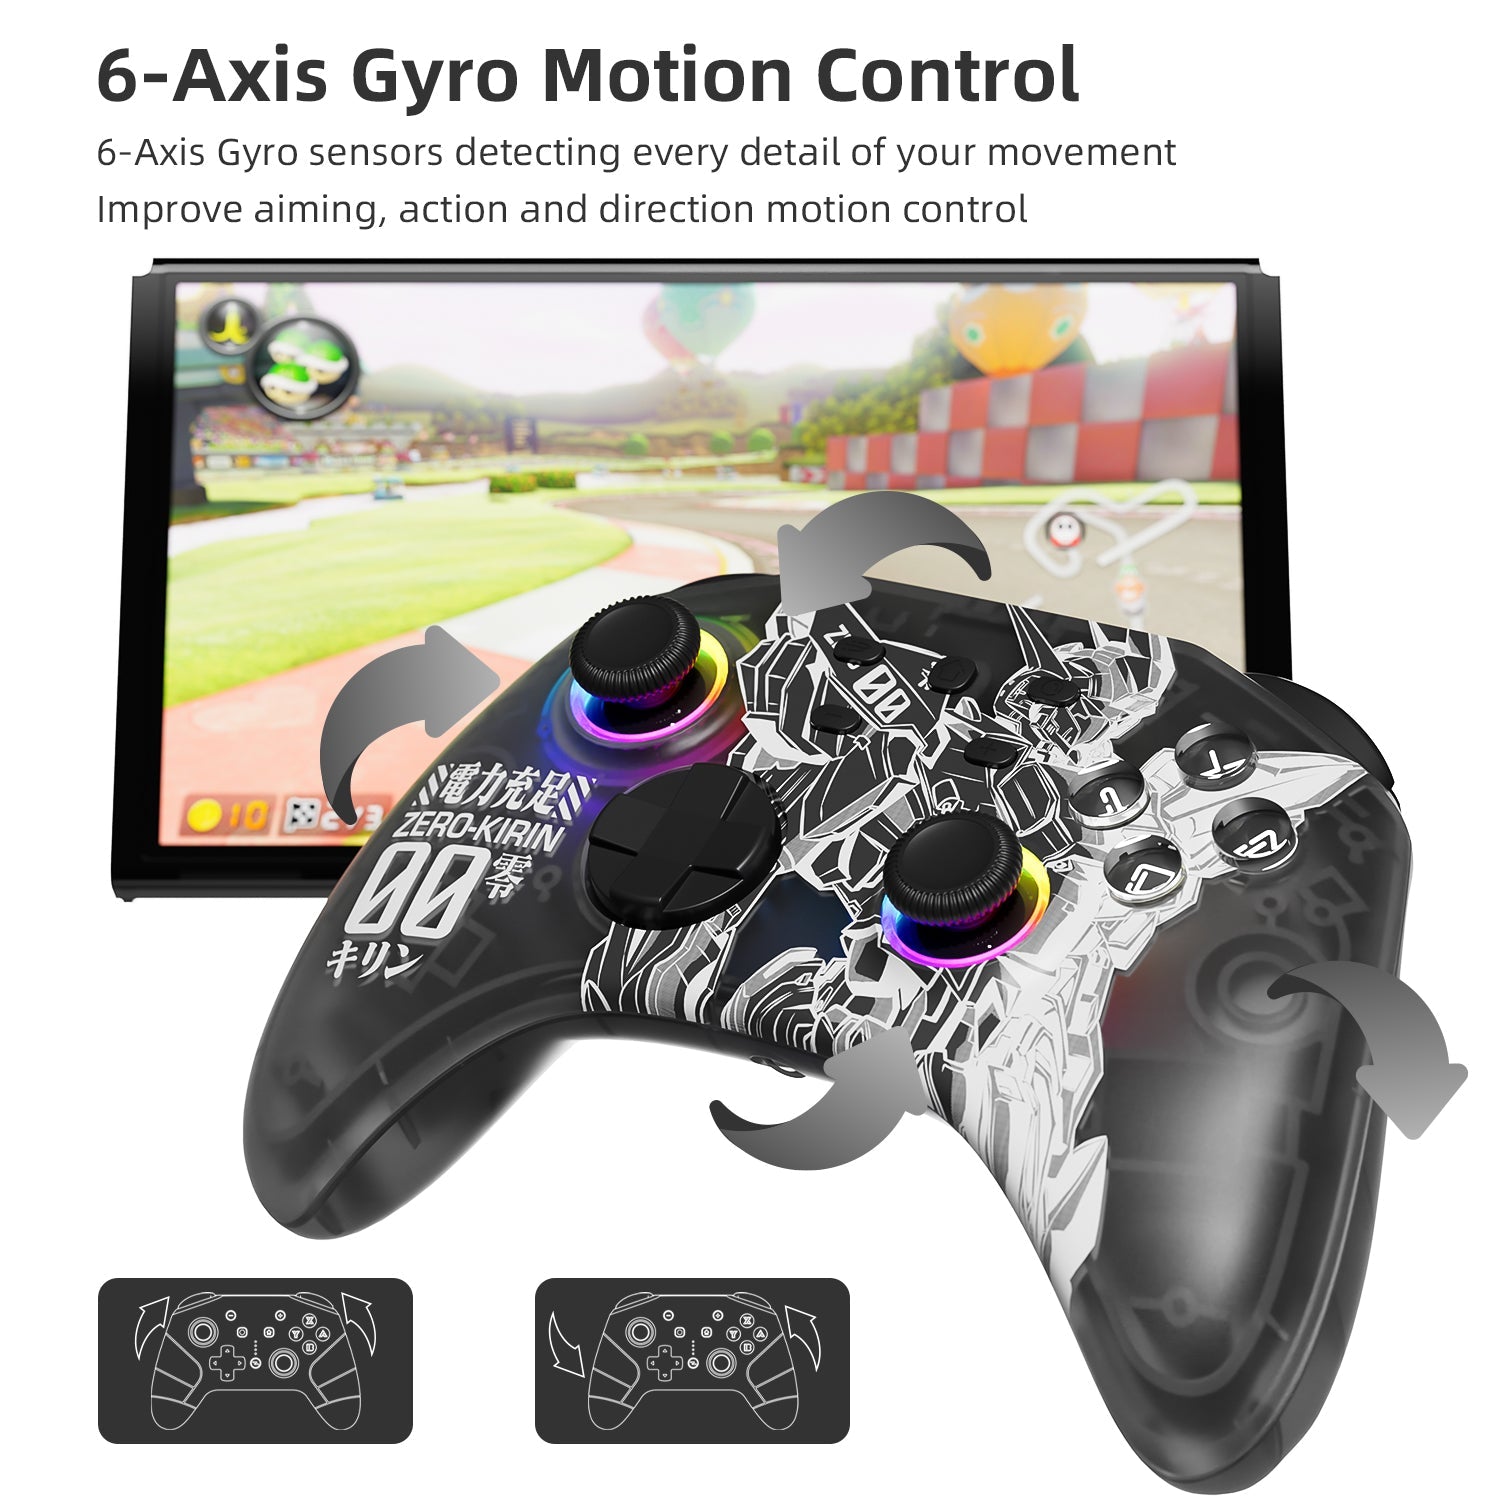 Mytrix Zero-Kirin Wireless Pro RGB Controller With Programmable Back Buttons And Turbo